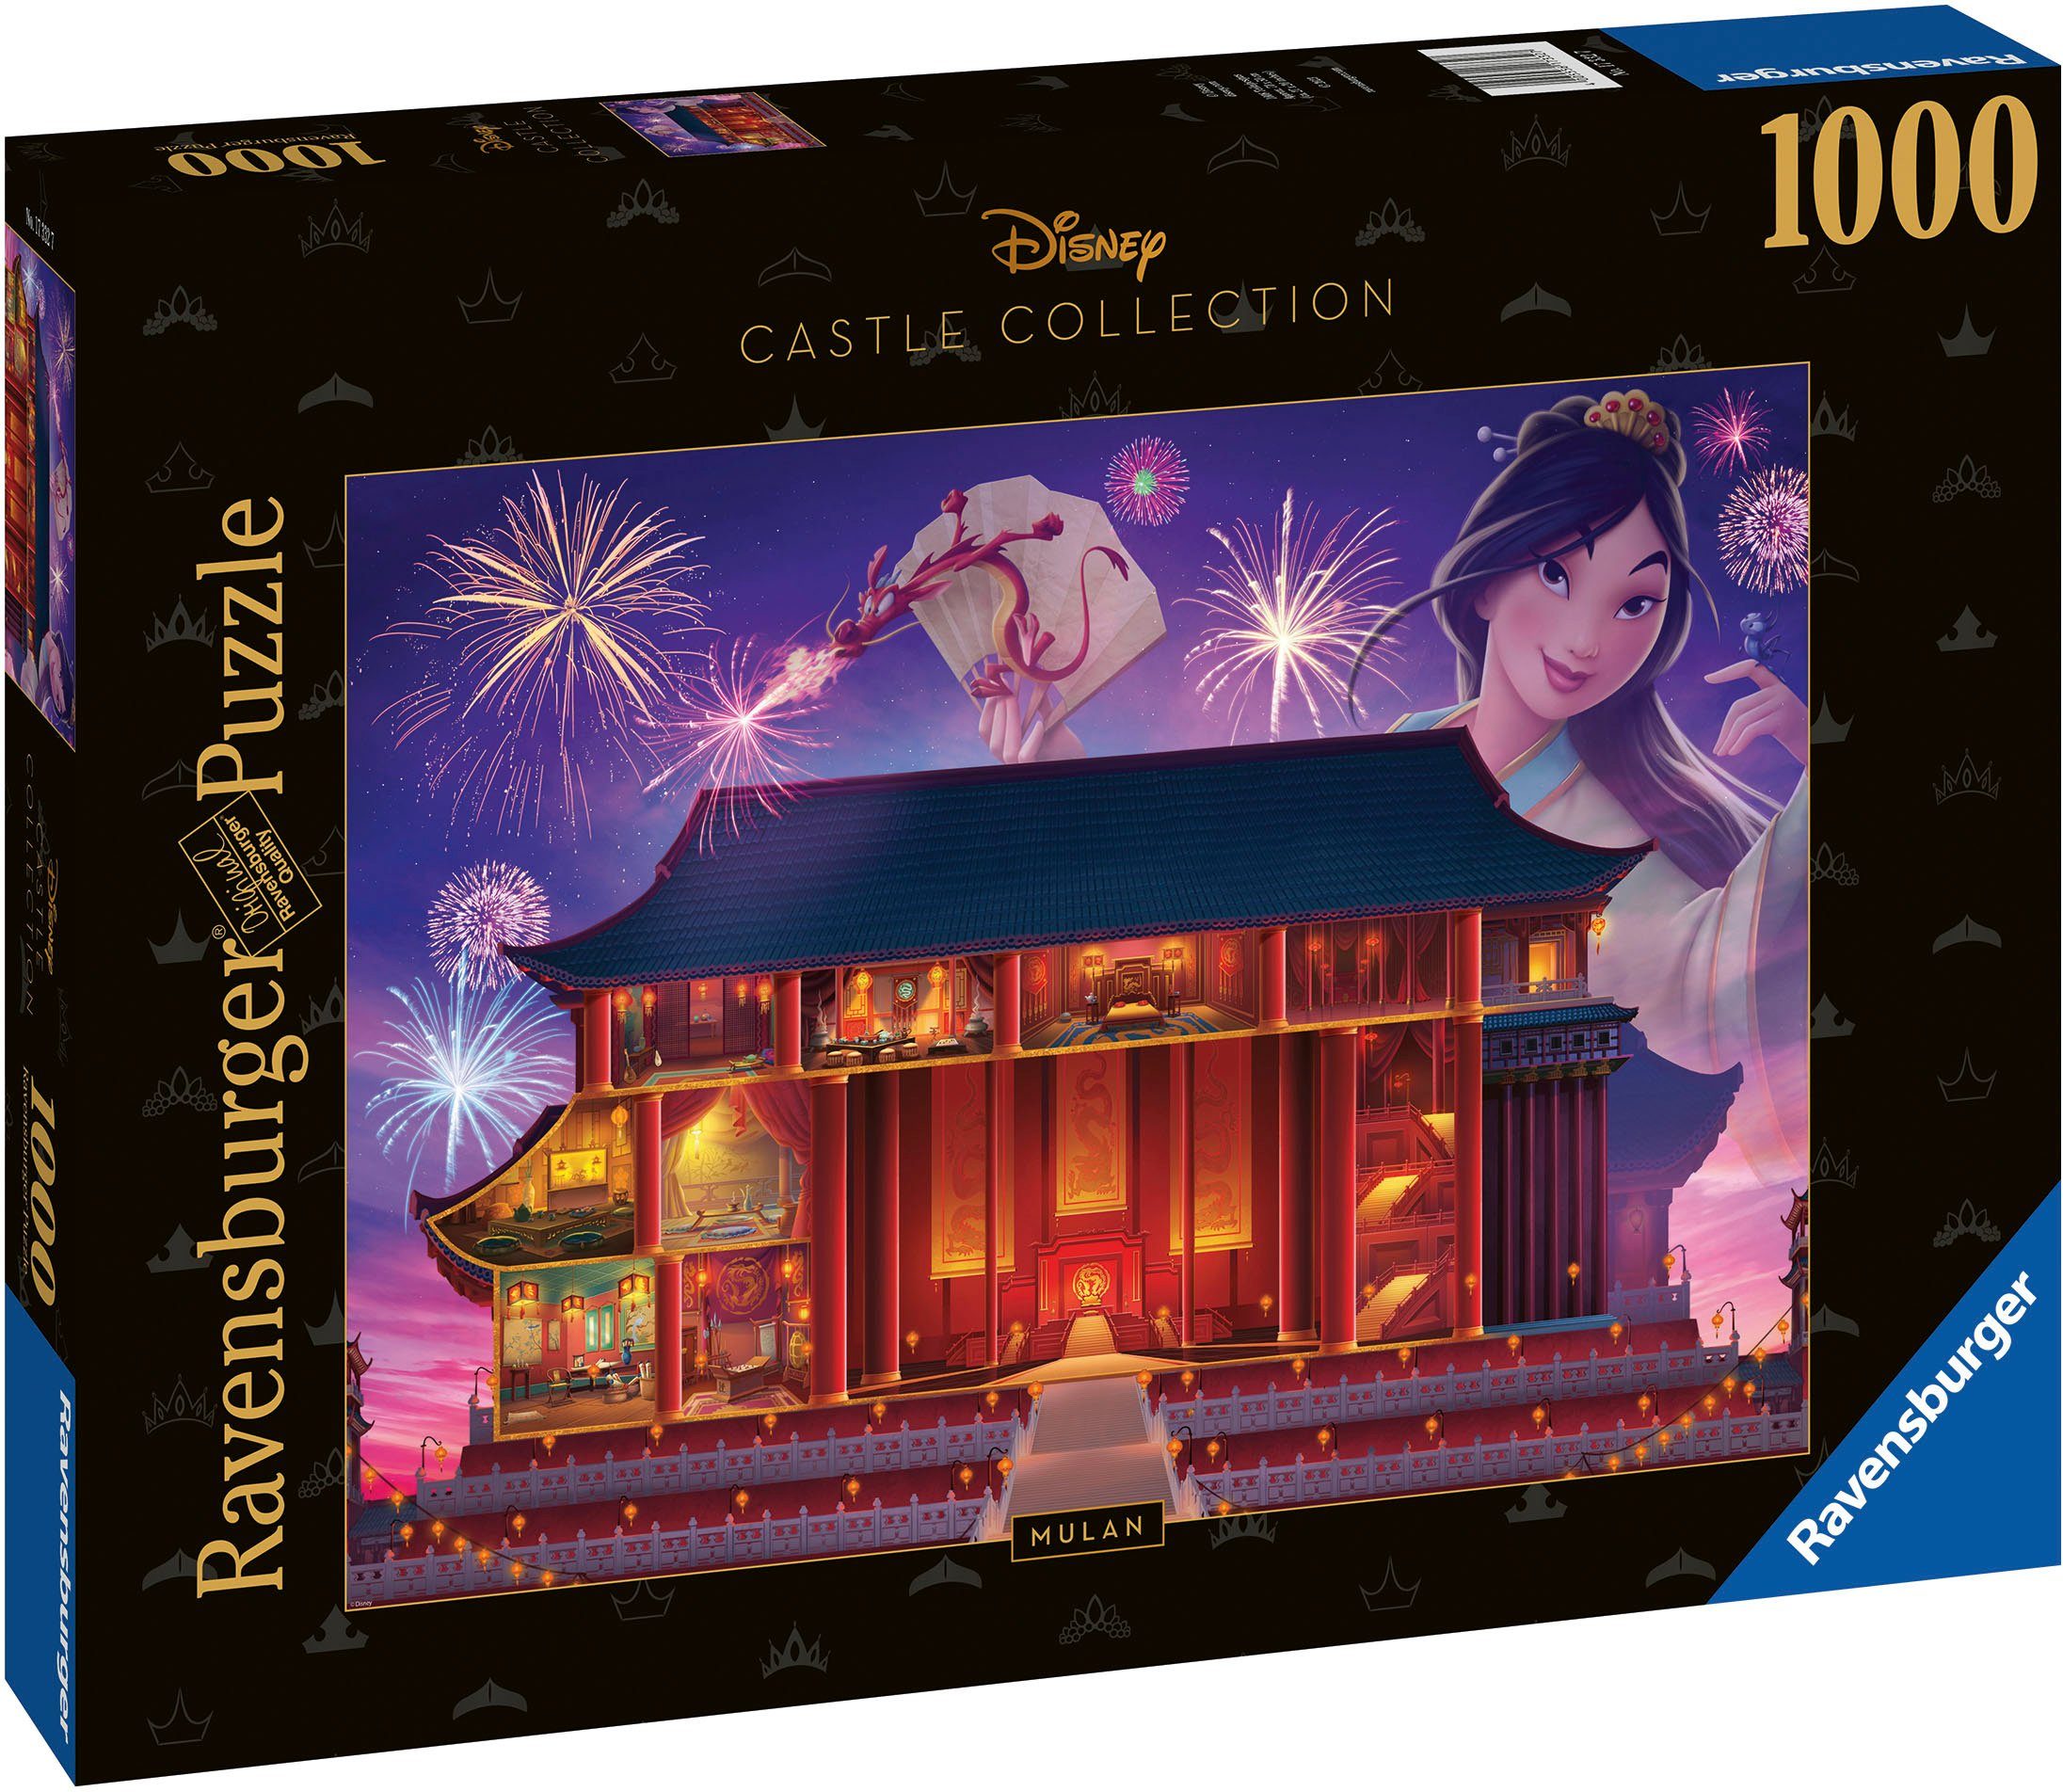 Disney Germany 1000 Puzzleteile, Mulan, Made Castle Collection, Puzzle Ravensburger in